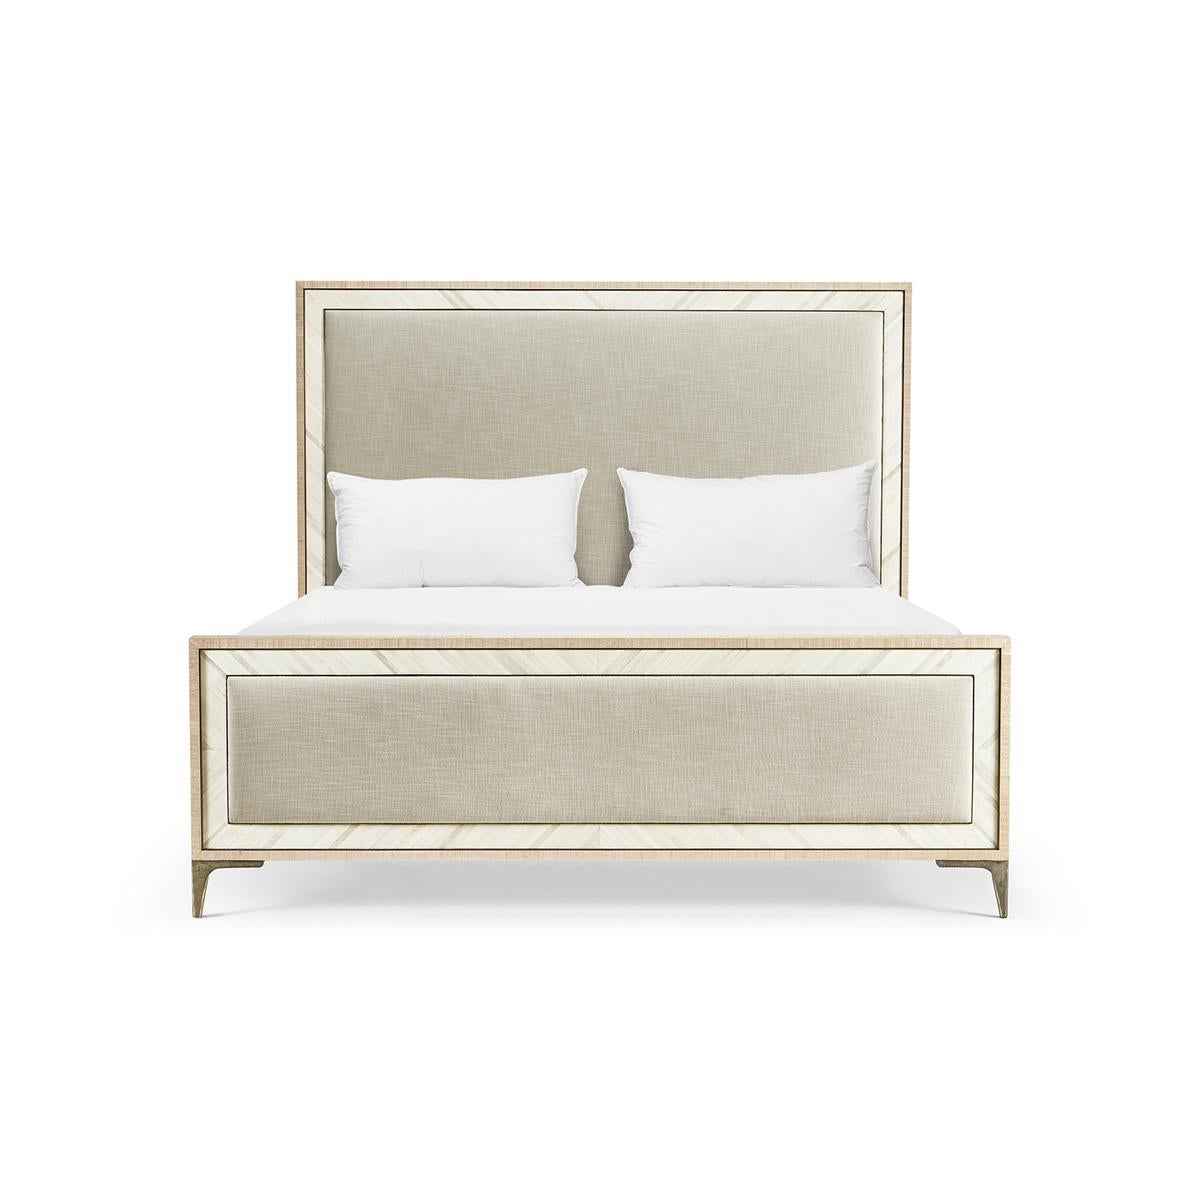 Midcentury style Tideline king size bed, this bone and linen upholstered bed is beautifully made from sustainably harvested materials with flawless craftsmanship. Performance linen upholstery compliments flush bone inlay framed with stainless steel